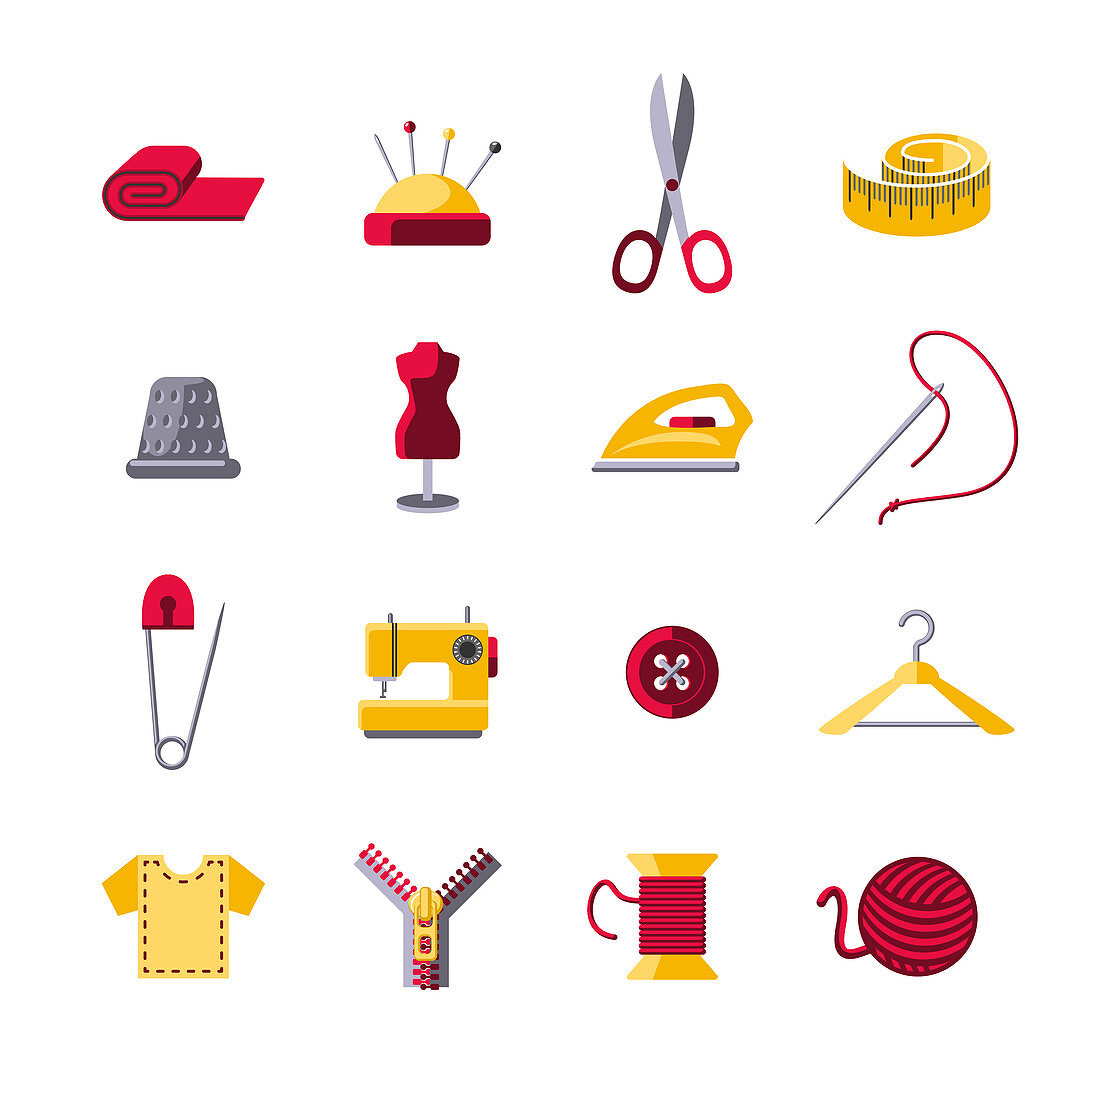 Sewing icons, illustration